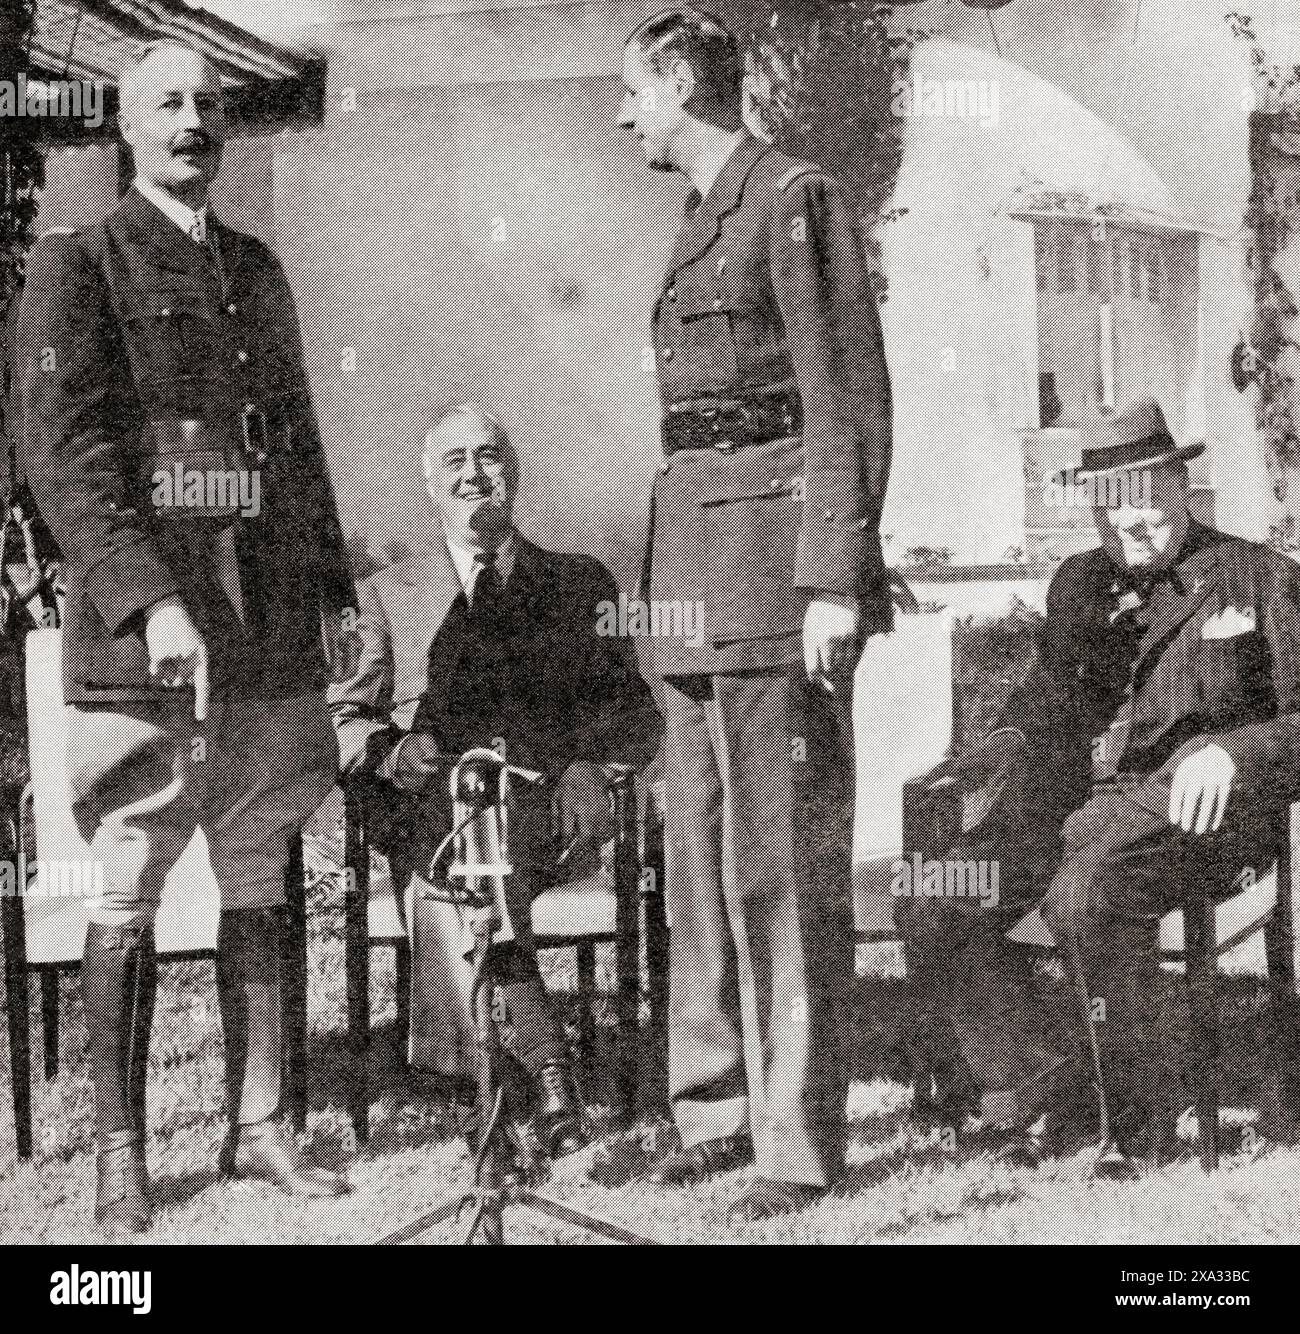 The Allied Conference in Casablanca, French Morocco, 14 January, 1943. From left to right, General Giraud, President Roosevelt, General De Gaulle and Winston Churchill.  Henri Honoré Giraud, 1879 – 1949. French military officer and leader of the Free French Forces during the Second World War. Franklin Delano Roosevelt, 1882 –1945, aka FDR.  American politician, 32nd president of the United States of America.  Charles André Joseph Marie de Gaulle, 1890 –1970. French army officer and statesman, 18th President of France.  Sir Winston Leonard Spencer-Churchill, 1874 – 1965. British polit Stock Photo